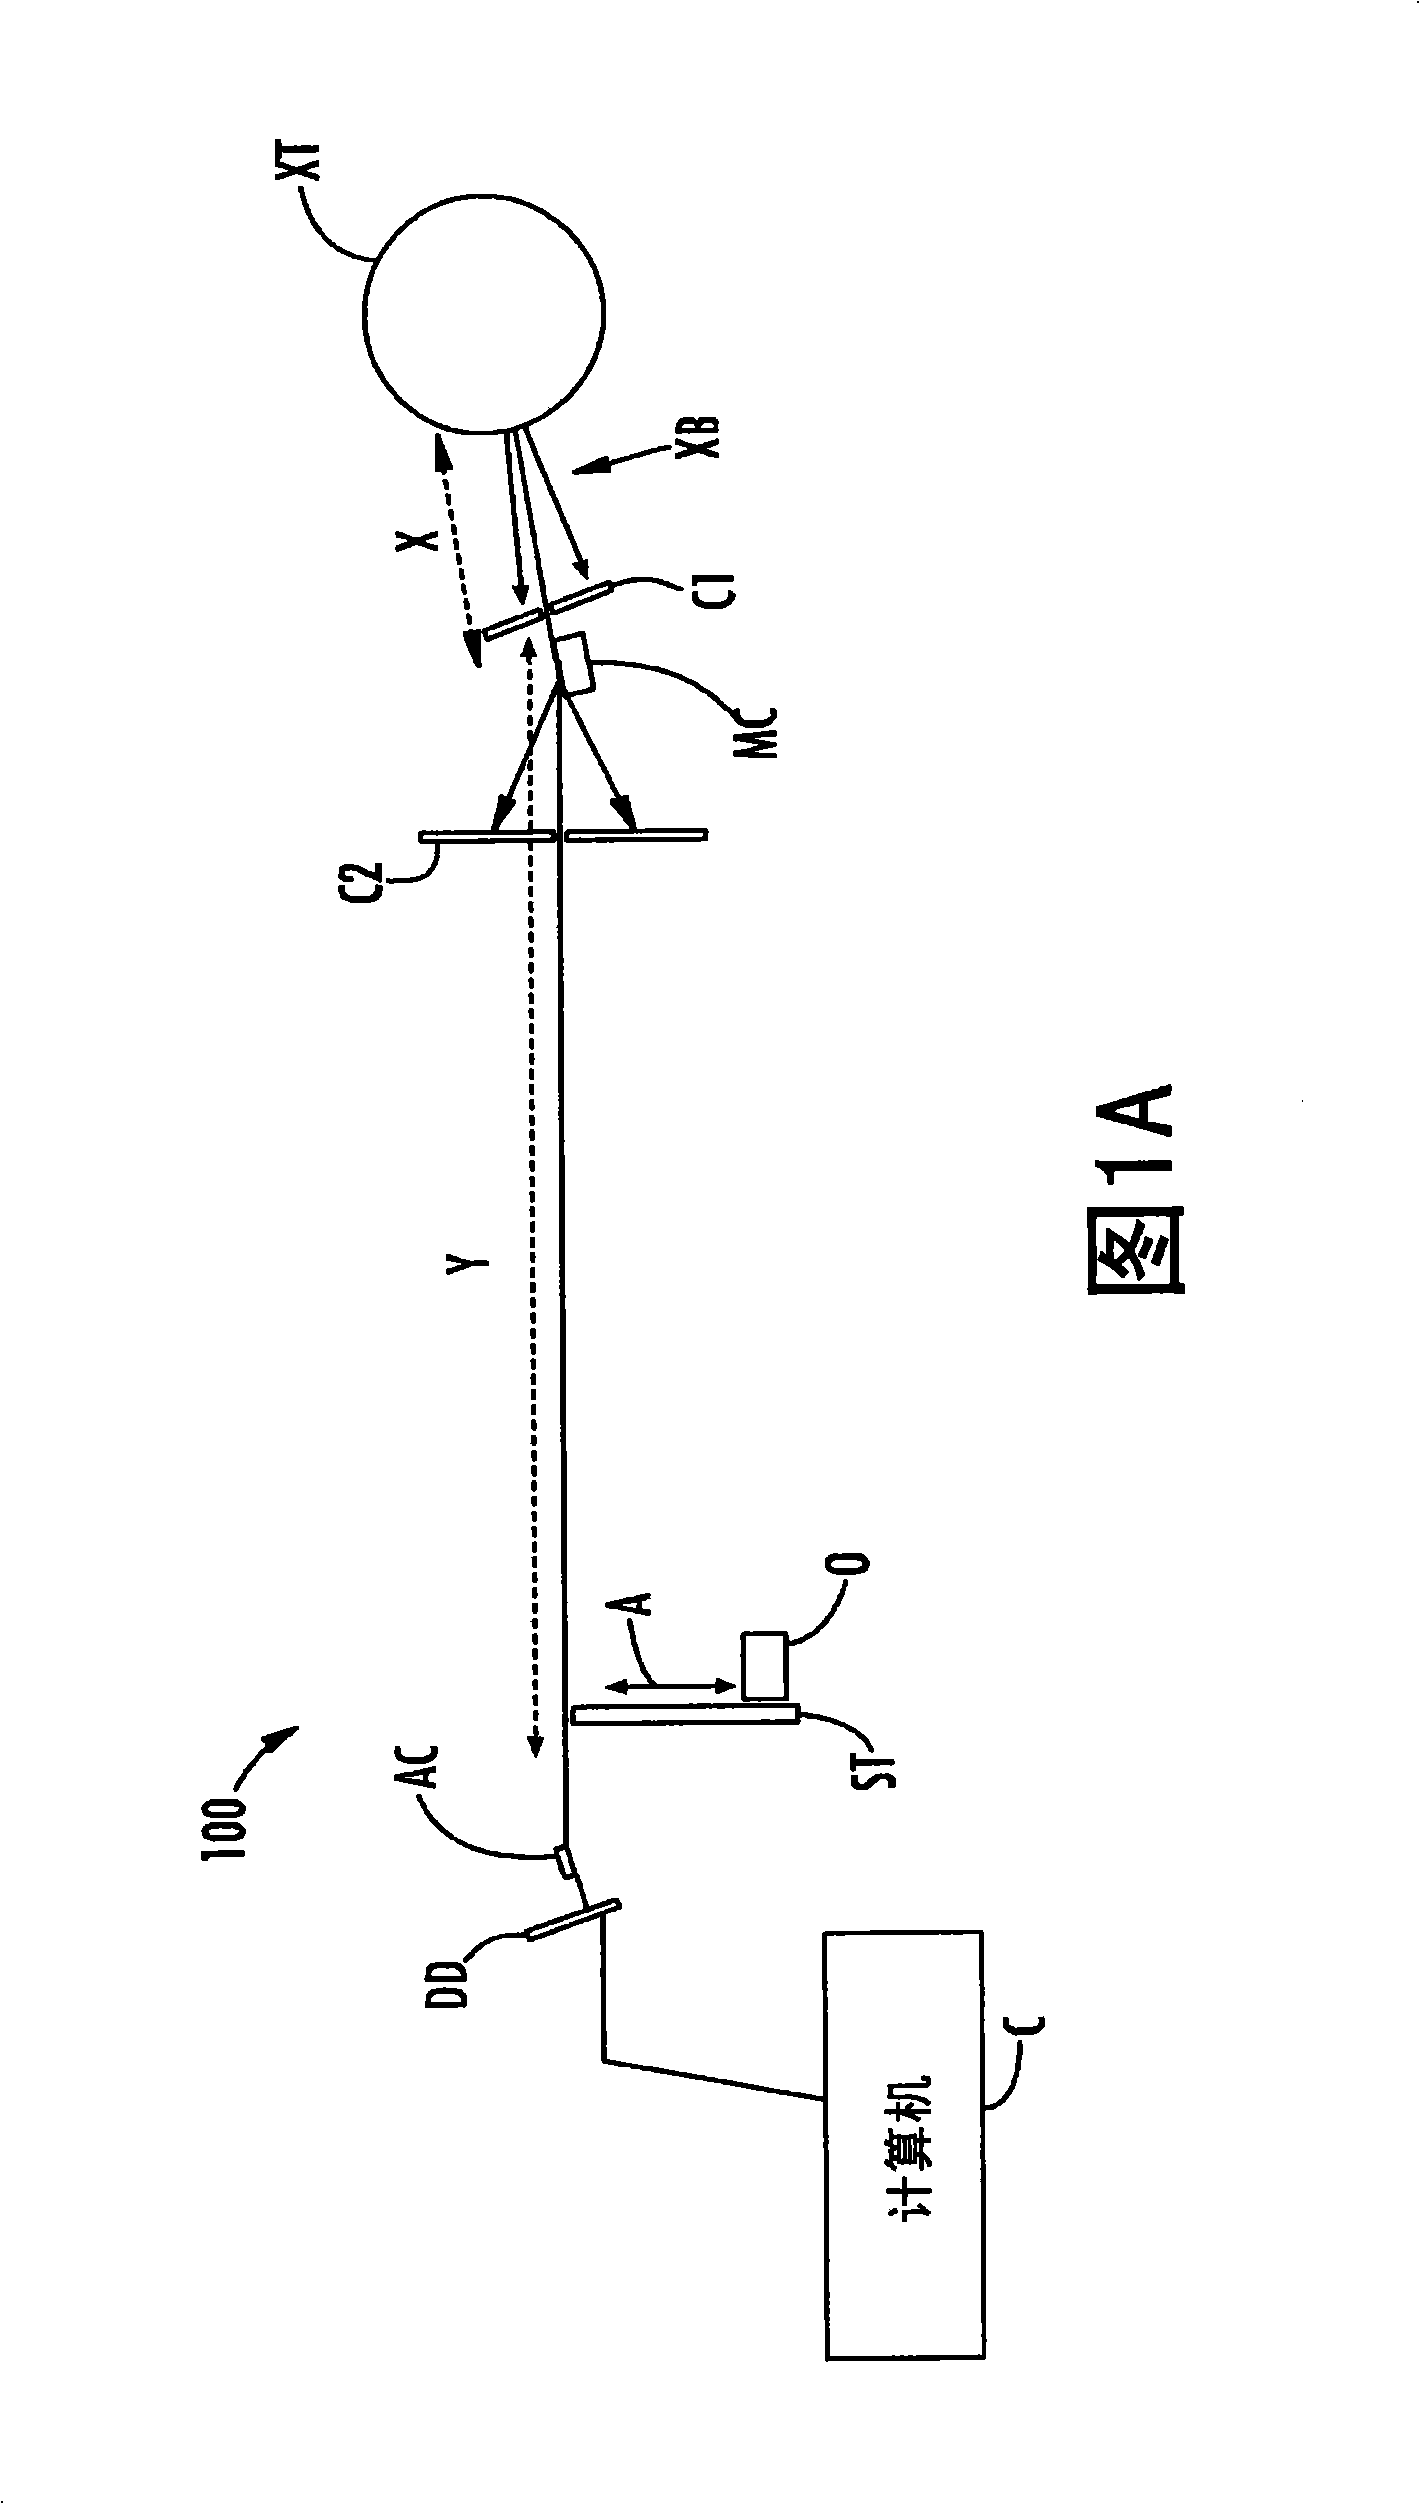 Systems and methods for detecting an image of an object by use of an x-ray beam having a polychromatic distribution